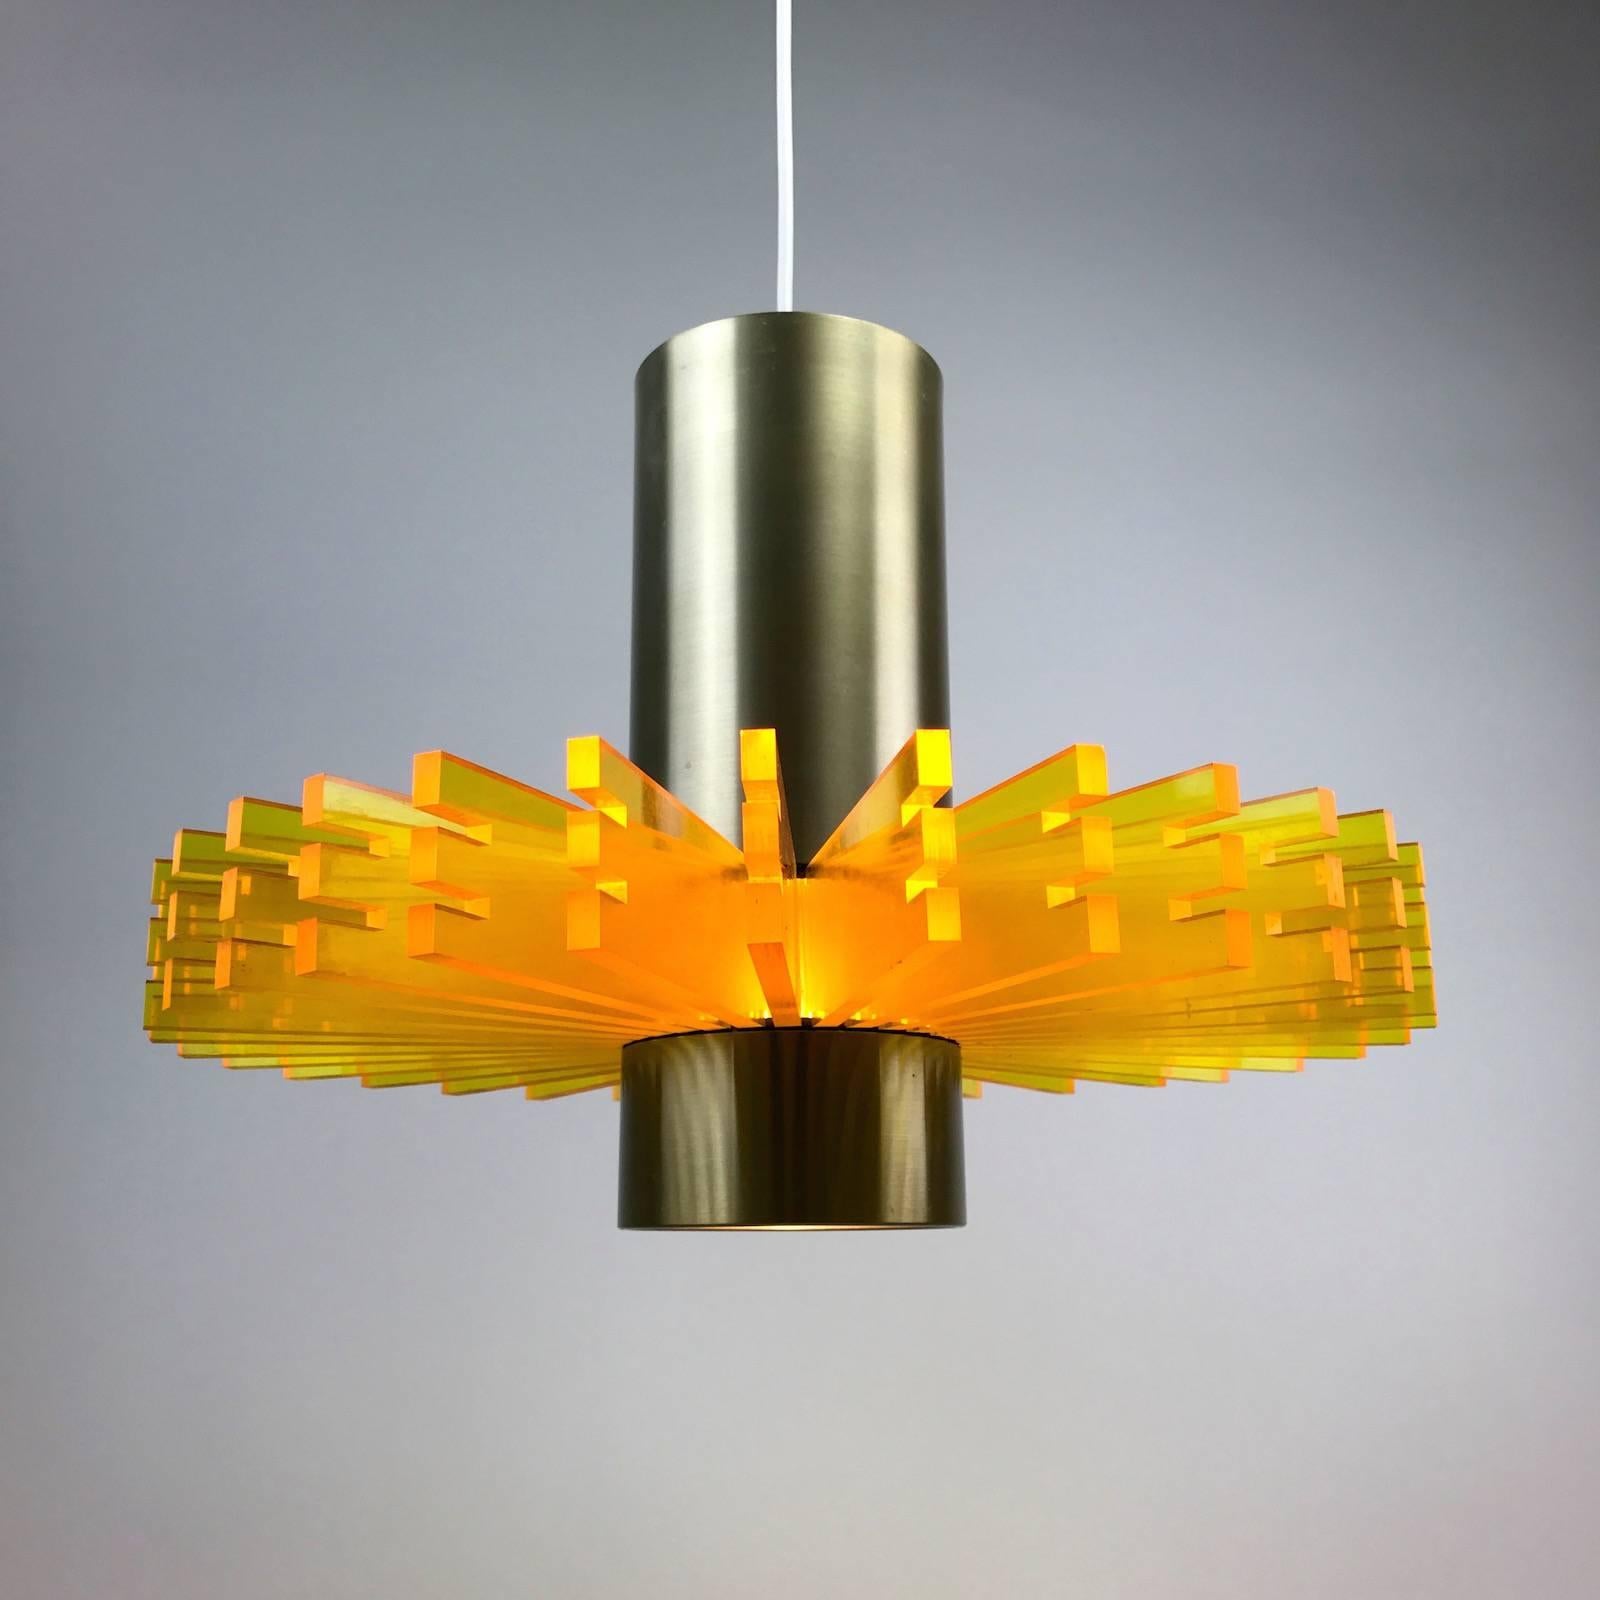 Mid-20th Century Danish Symphonie Ceiling Light by Claus Bolby for CEBO